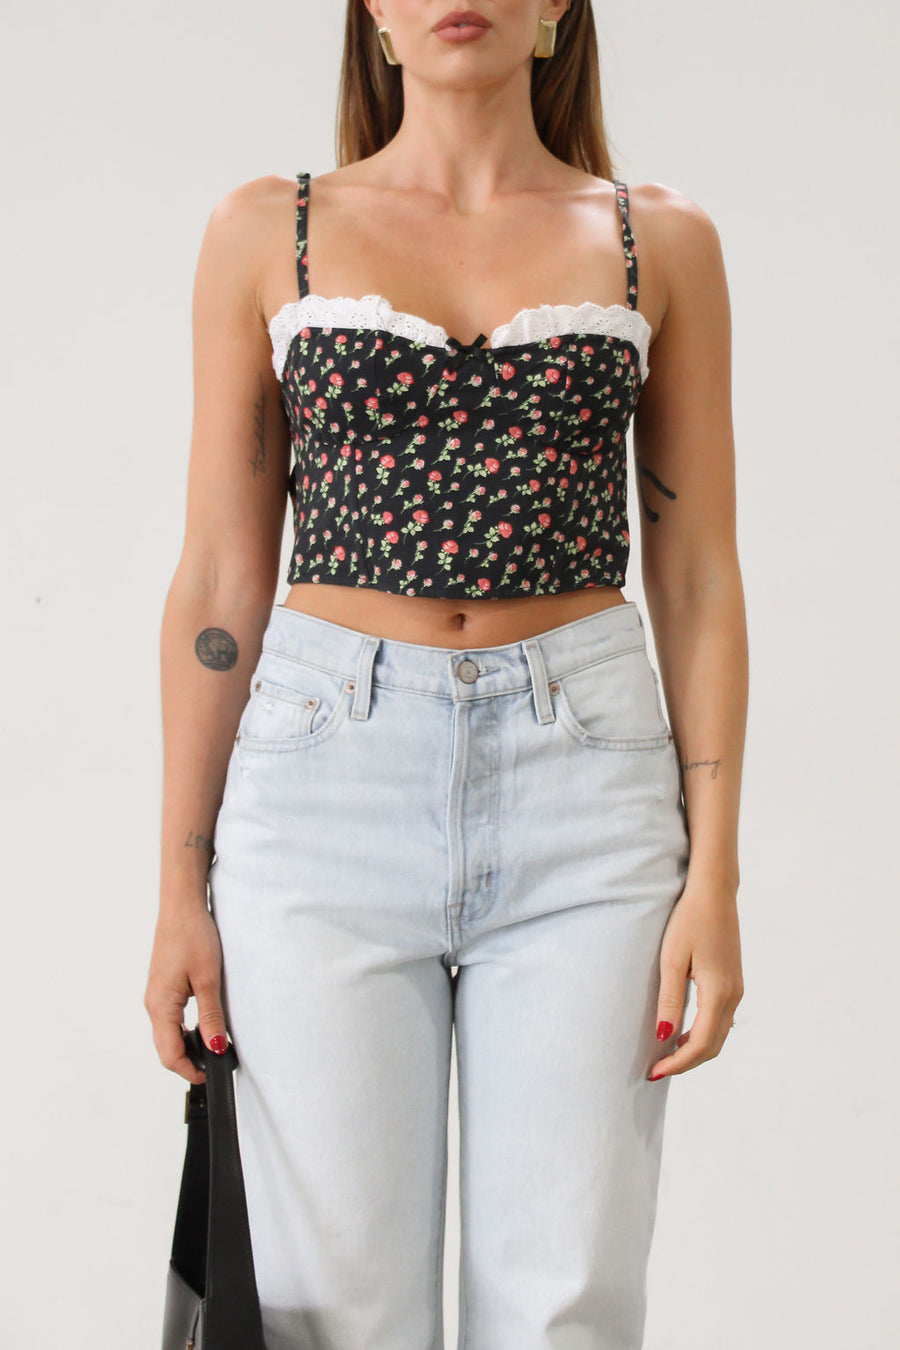 Floral printed woven cropped tank top. Adjustable straps. Boning in bodice. Elastic back strap with hook and eye closures. Back zipper closure. Fully lined.